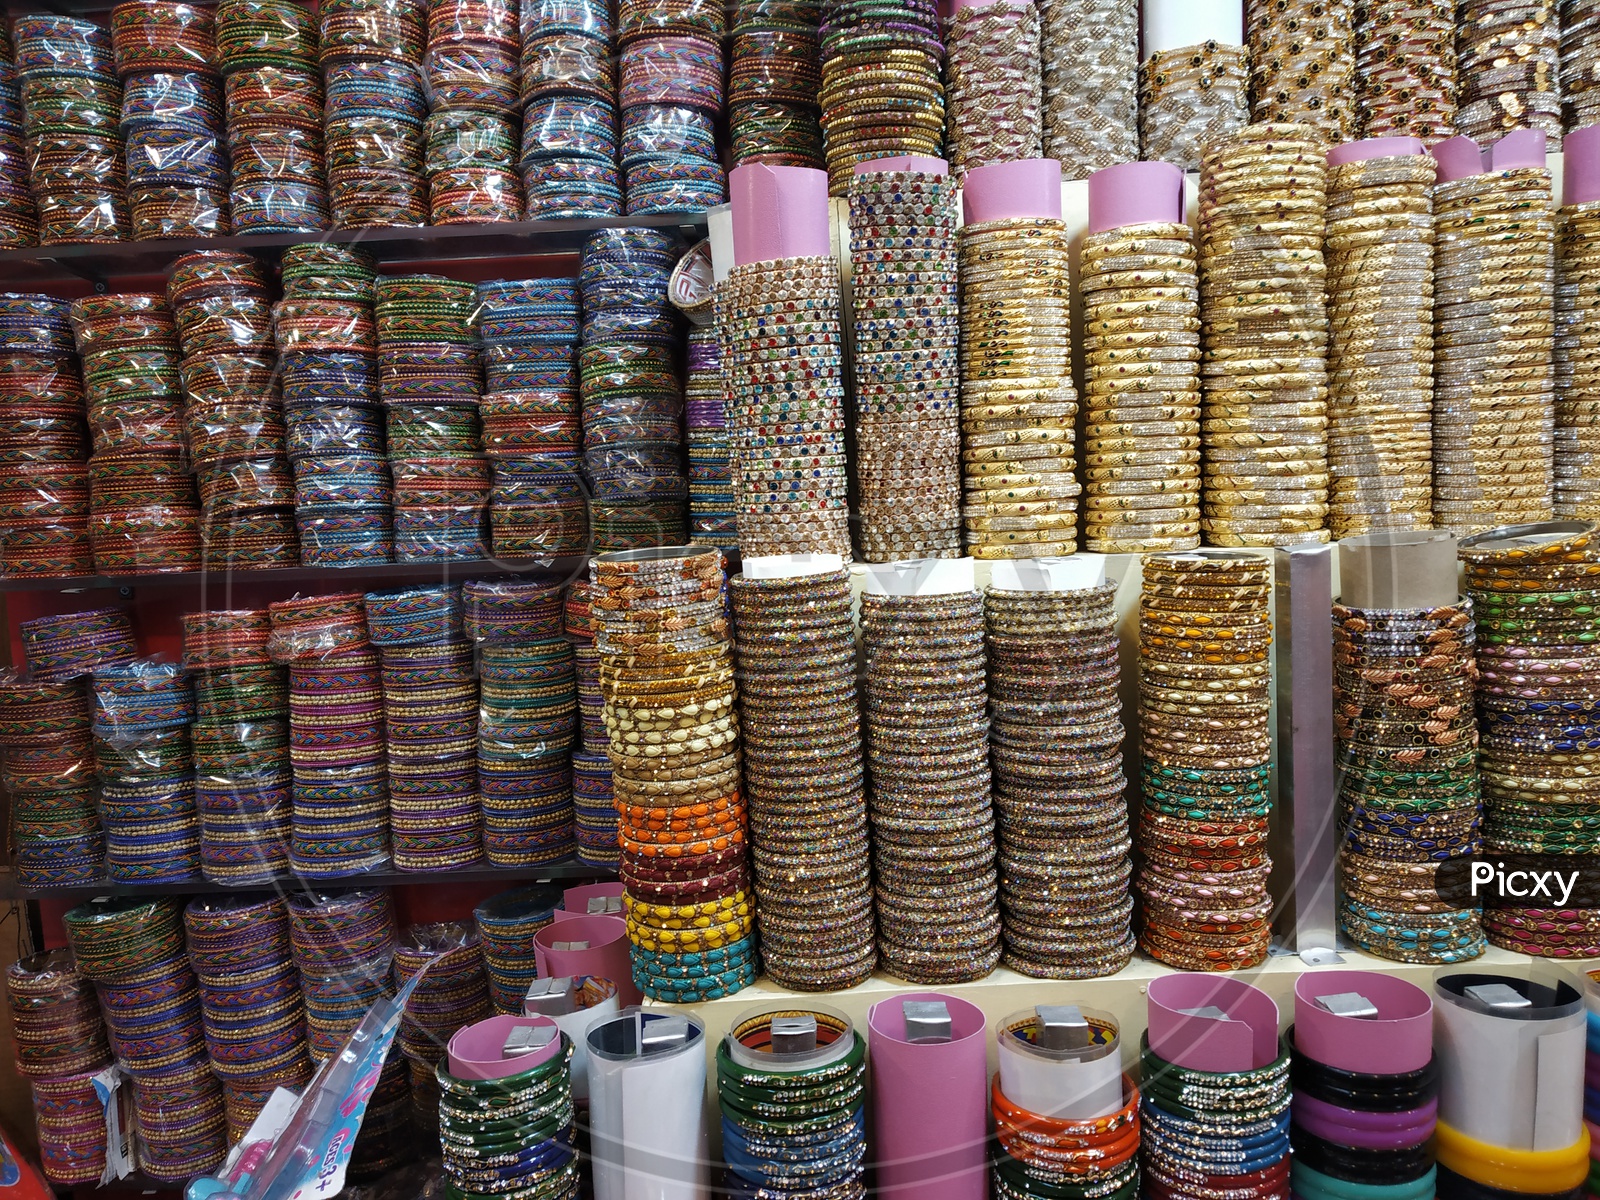 Bangles In Rows At a Vendor Stall